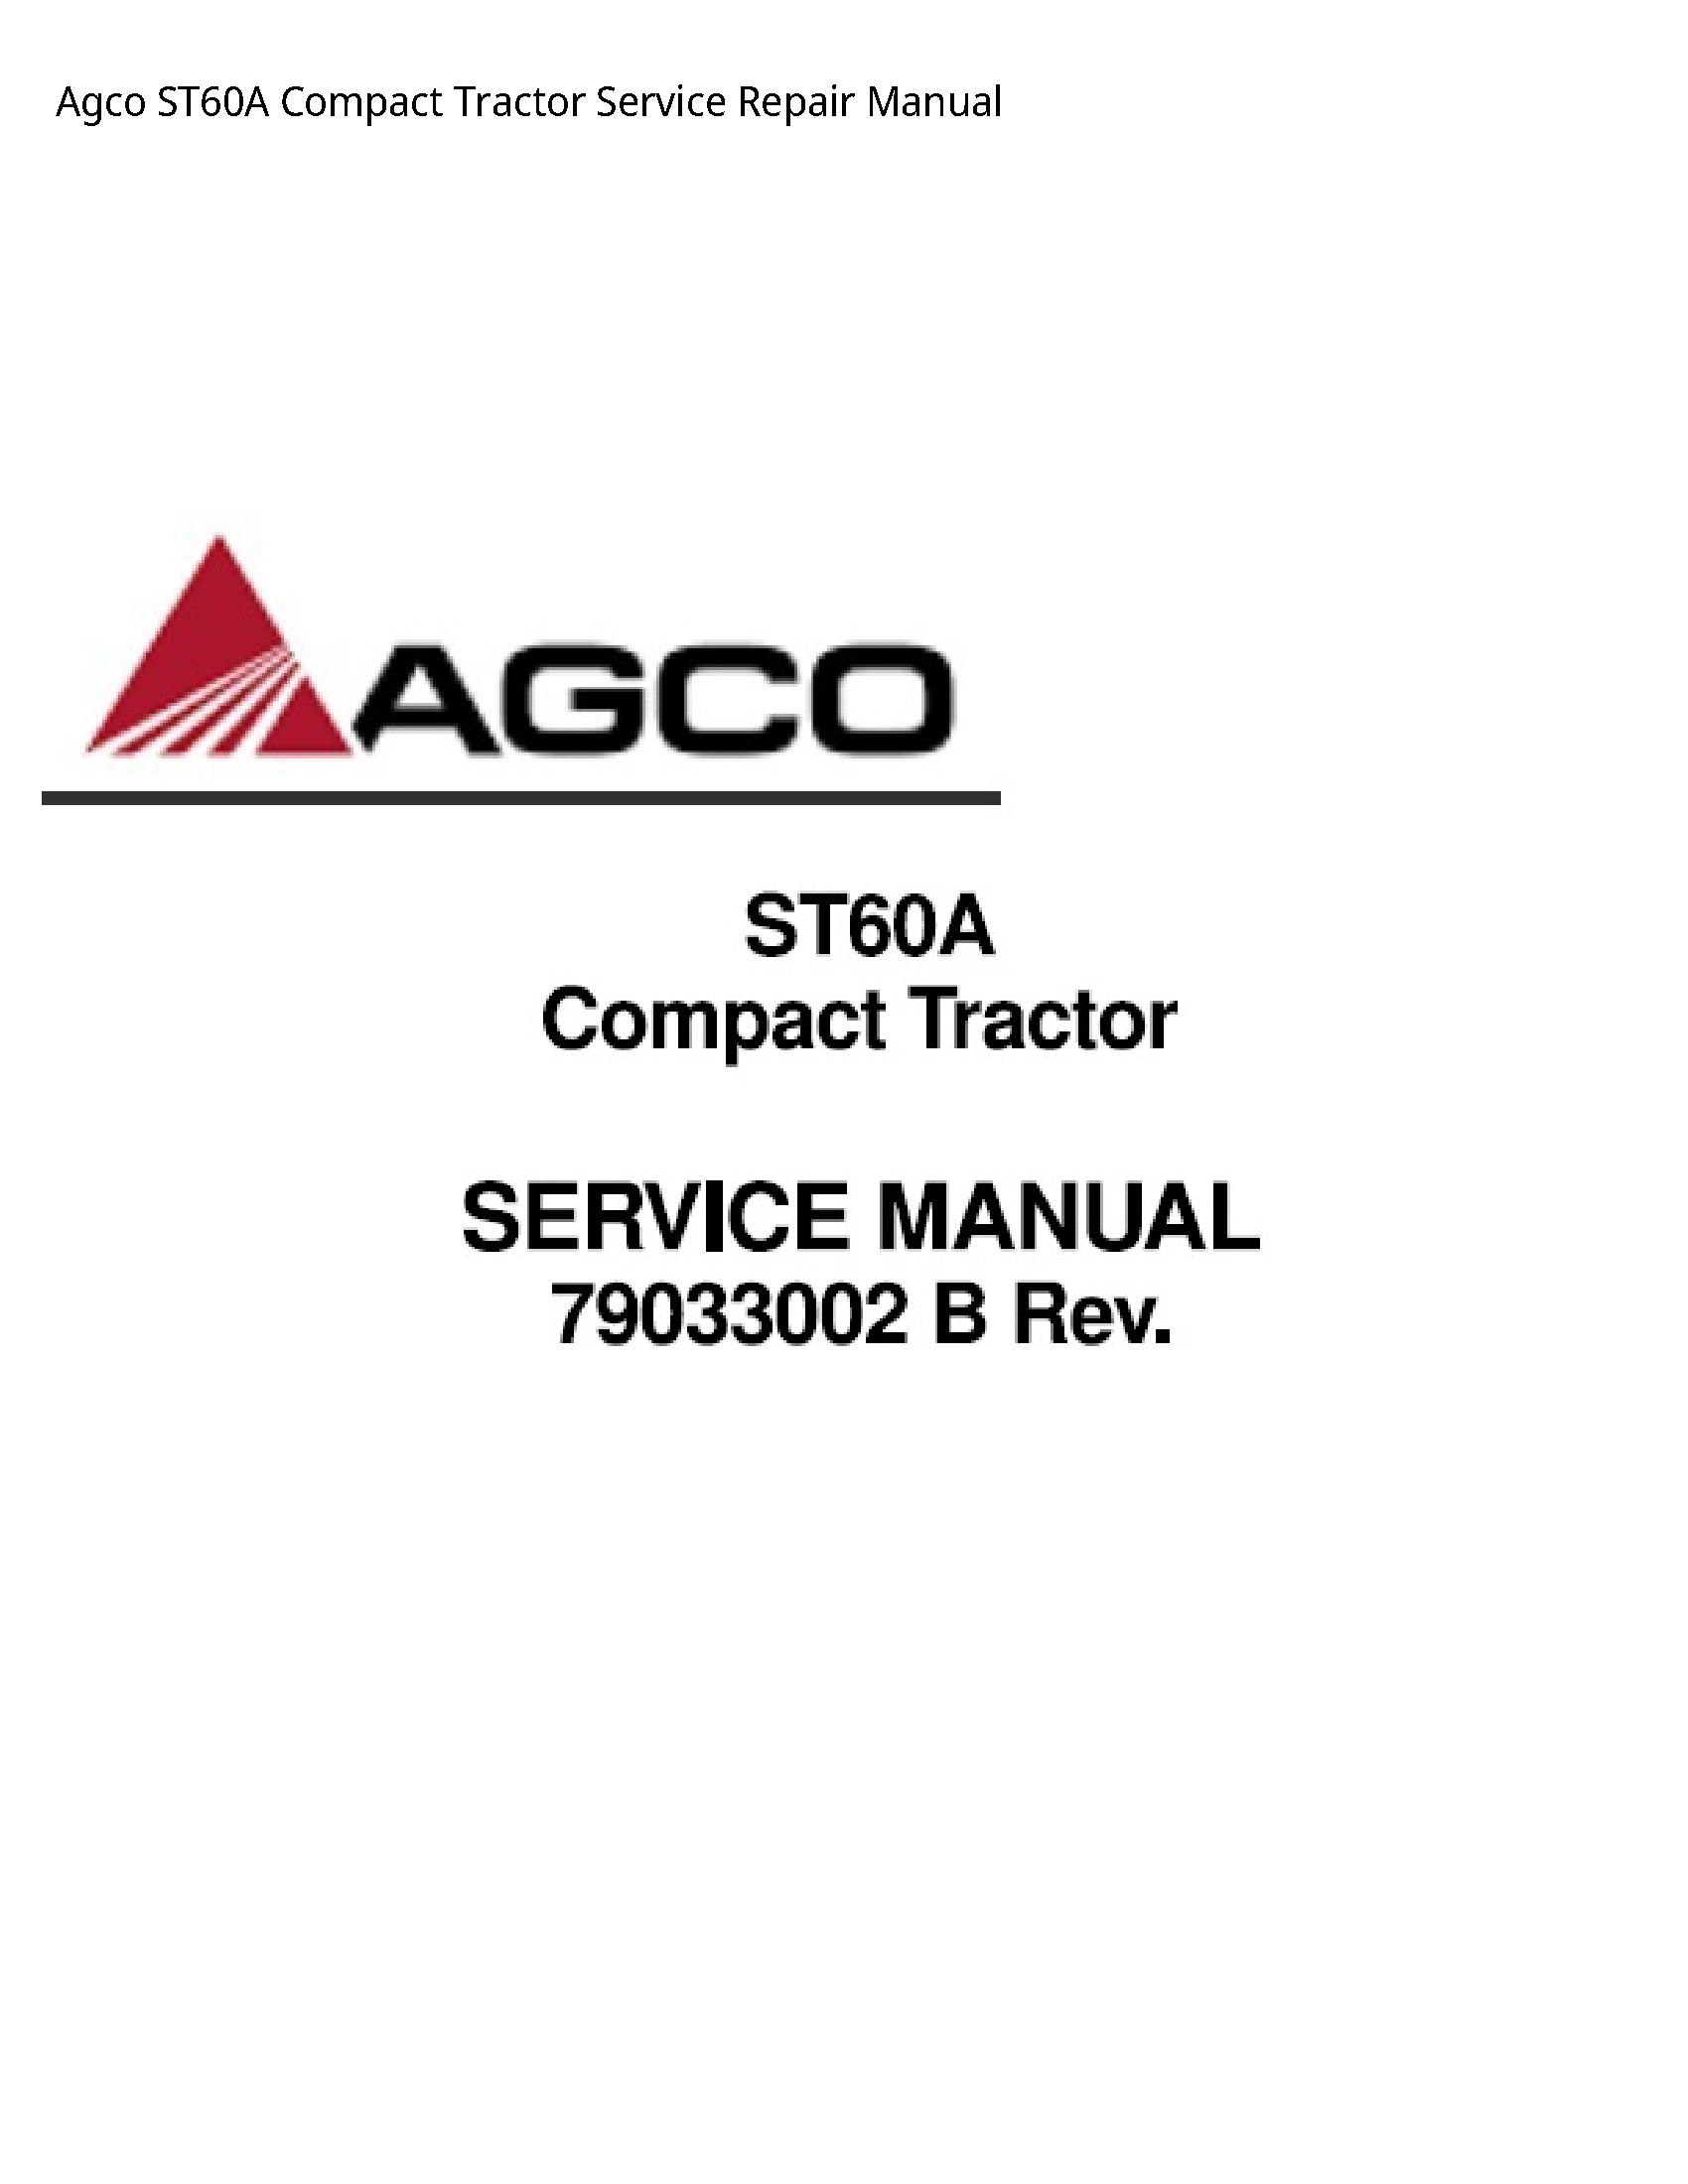 AGCO ST60A Compact Tractor manual